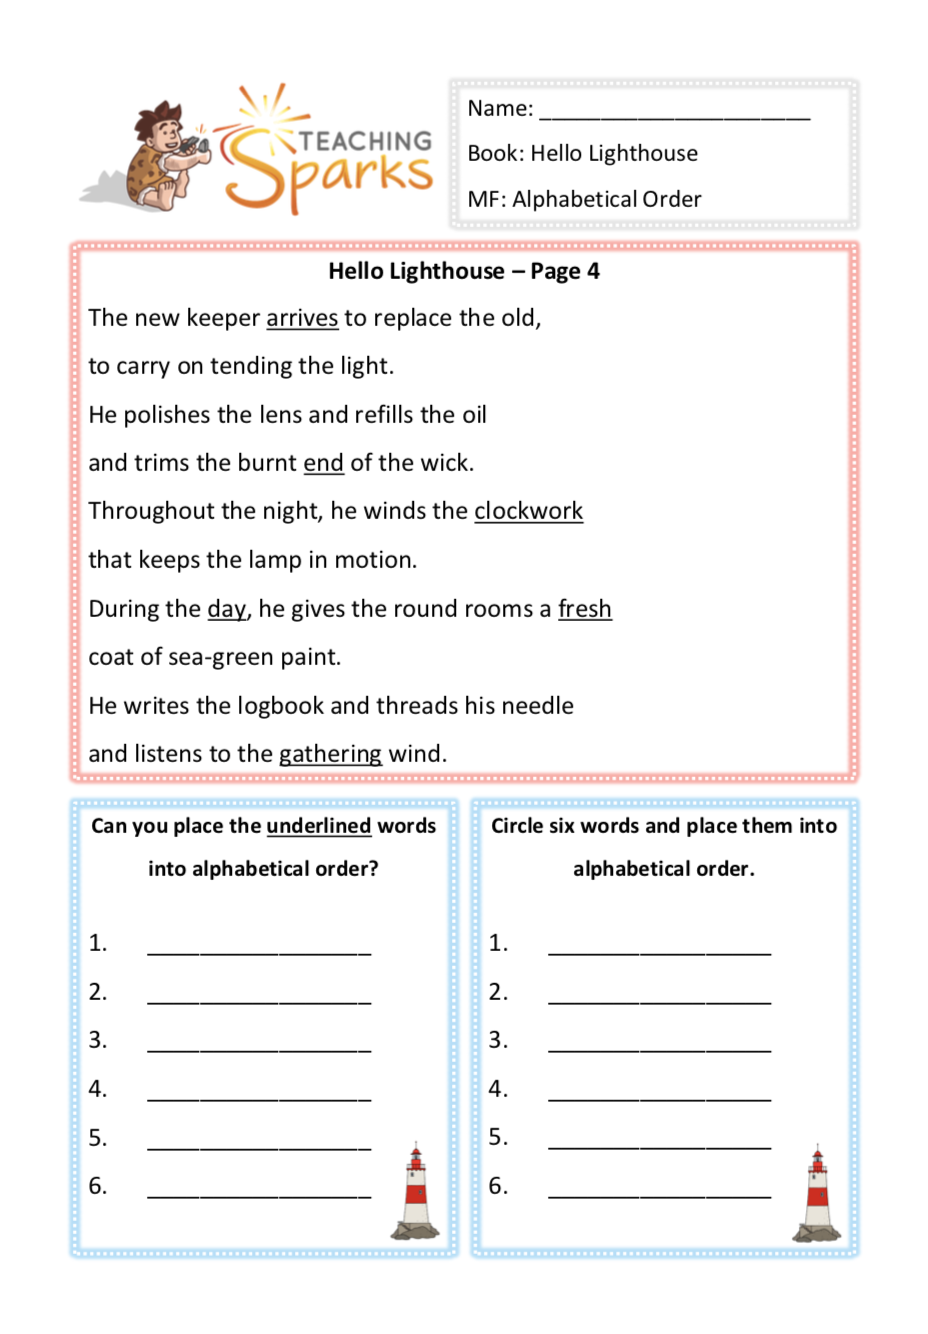 Hello Lighthouse | Guided Reading Resources | KS1 Reading Resources